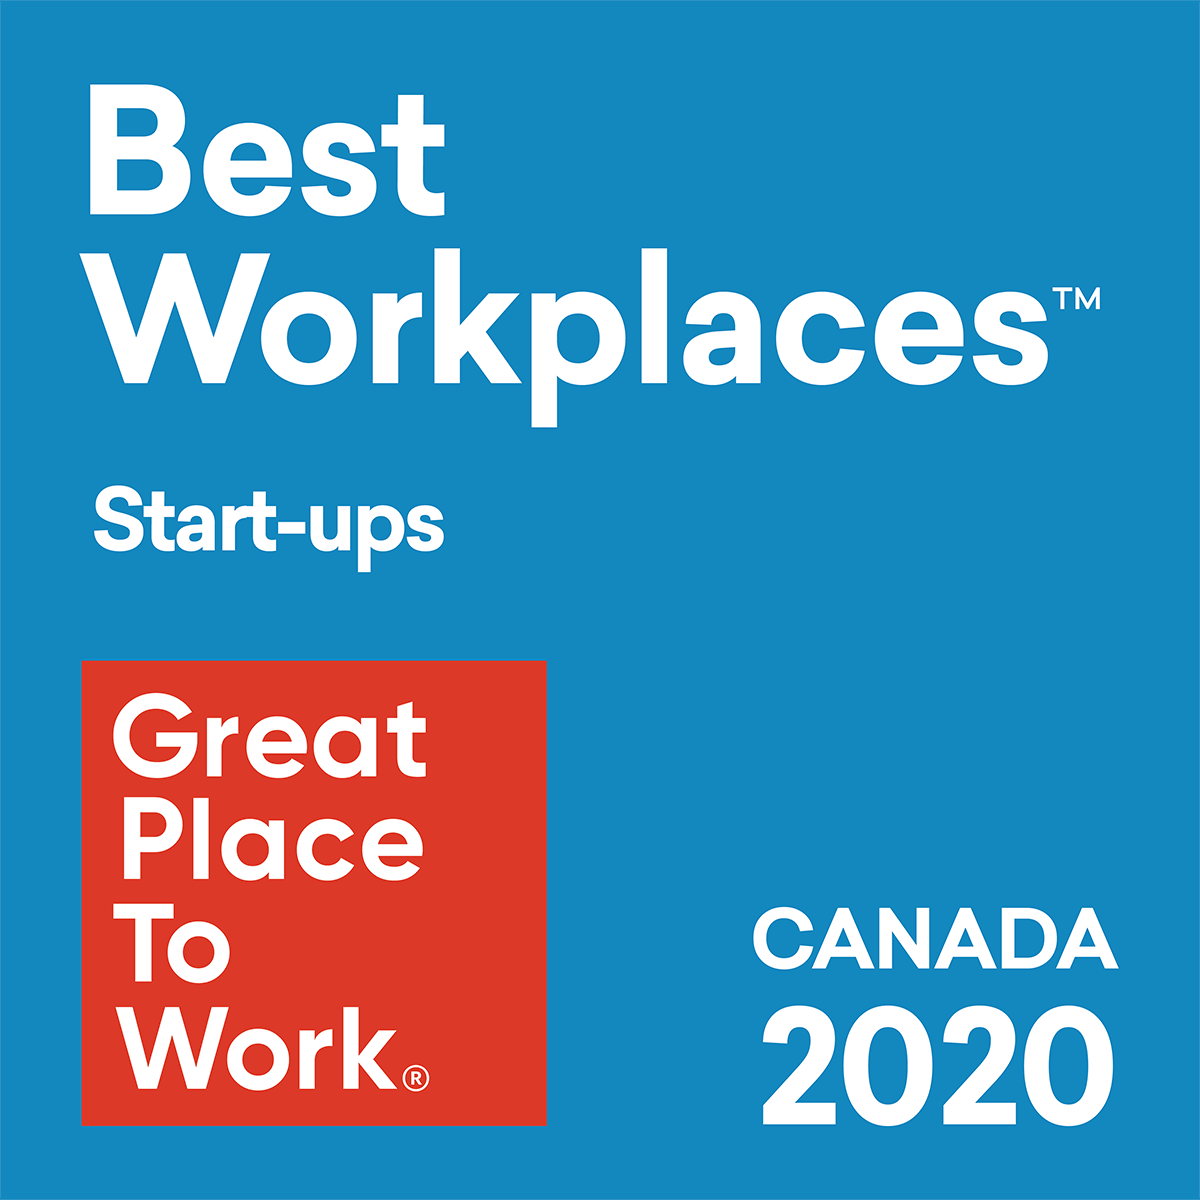 Great Place To Work 2020: Start-ups